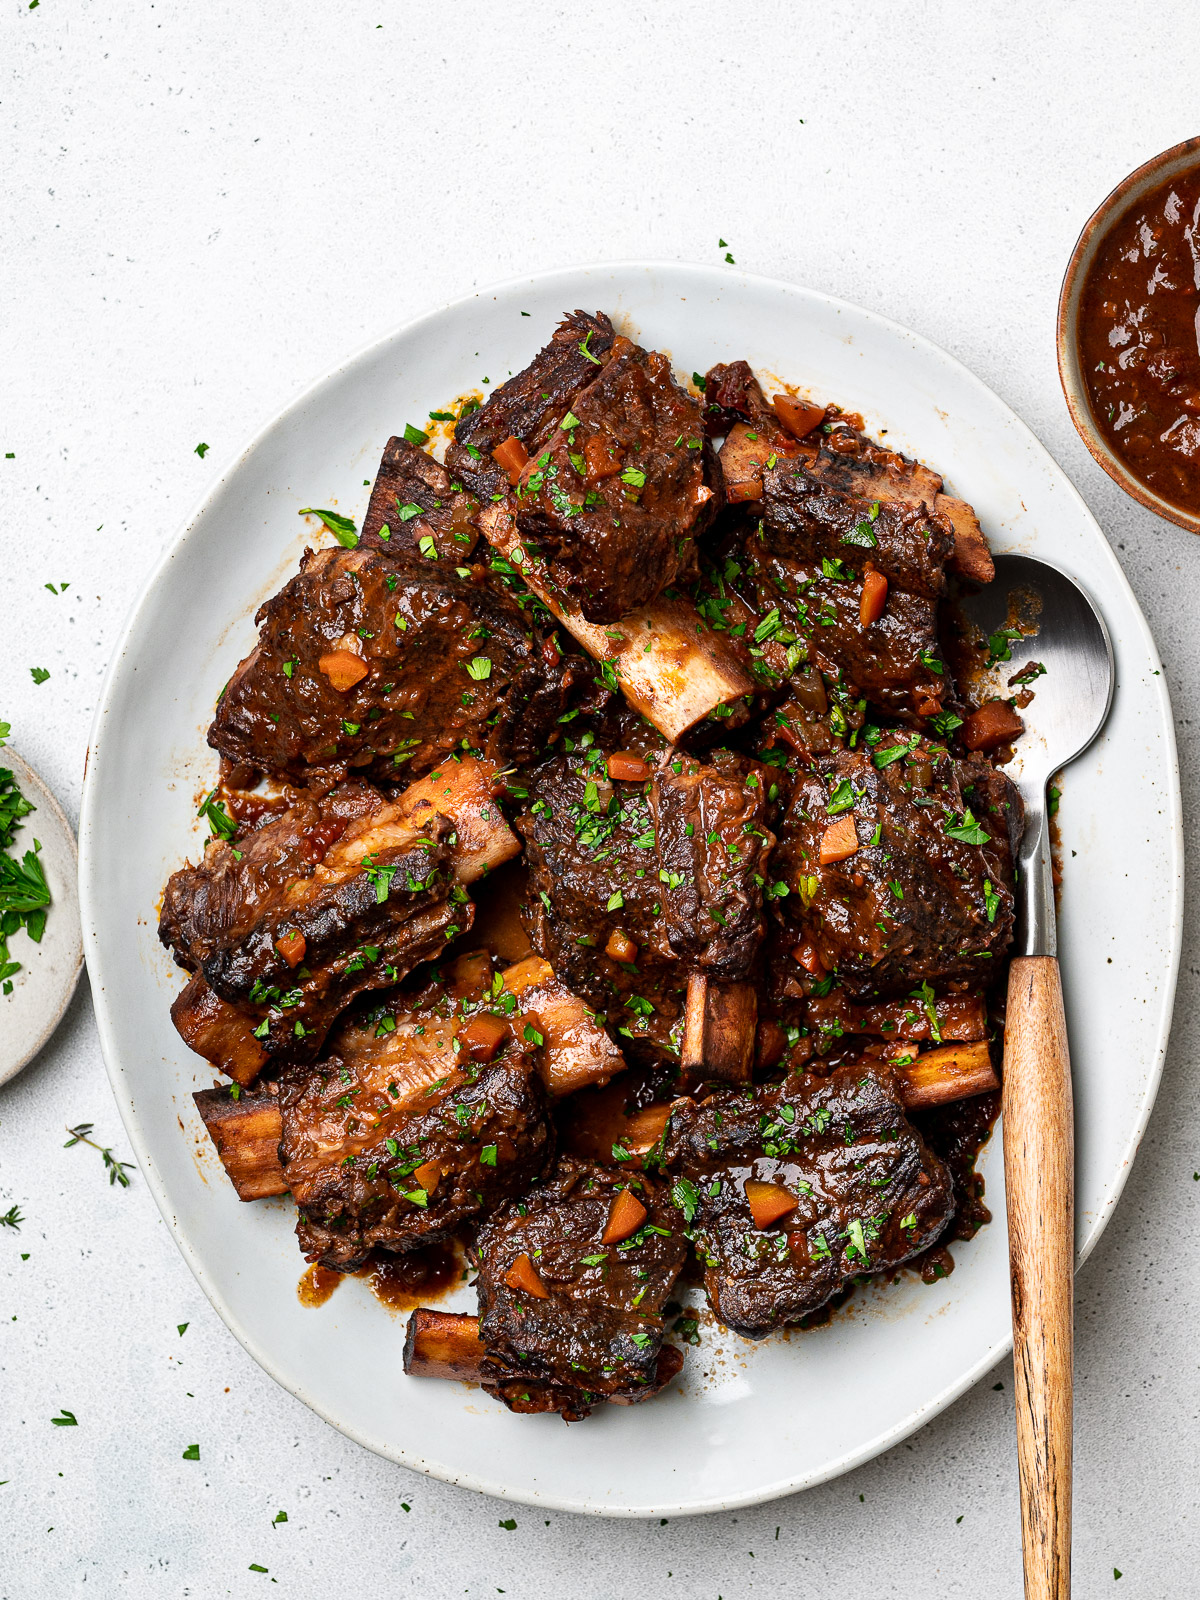 Braised short ribs served on a platter garnished with chopped parsley and sauce on the side in a bowl